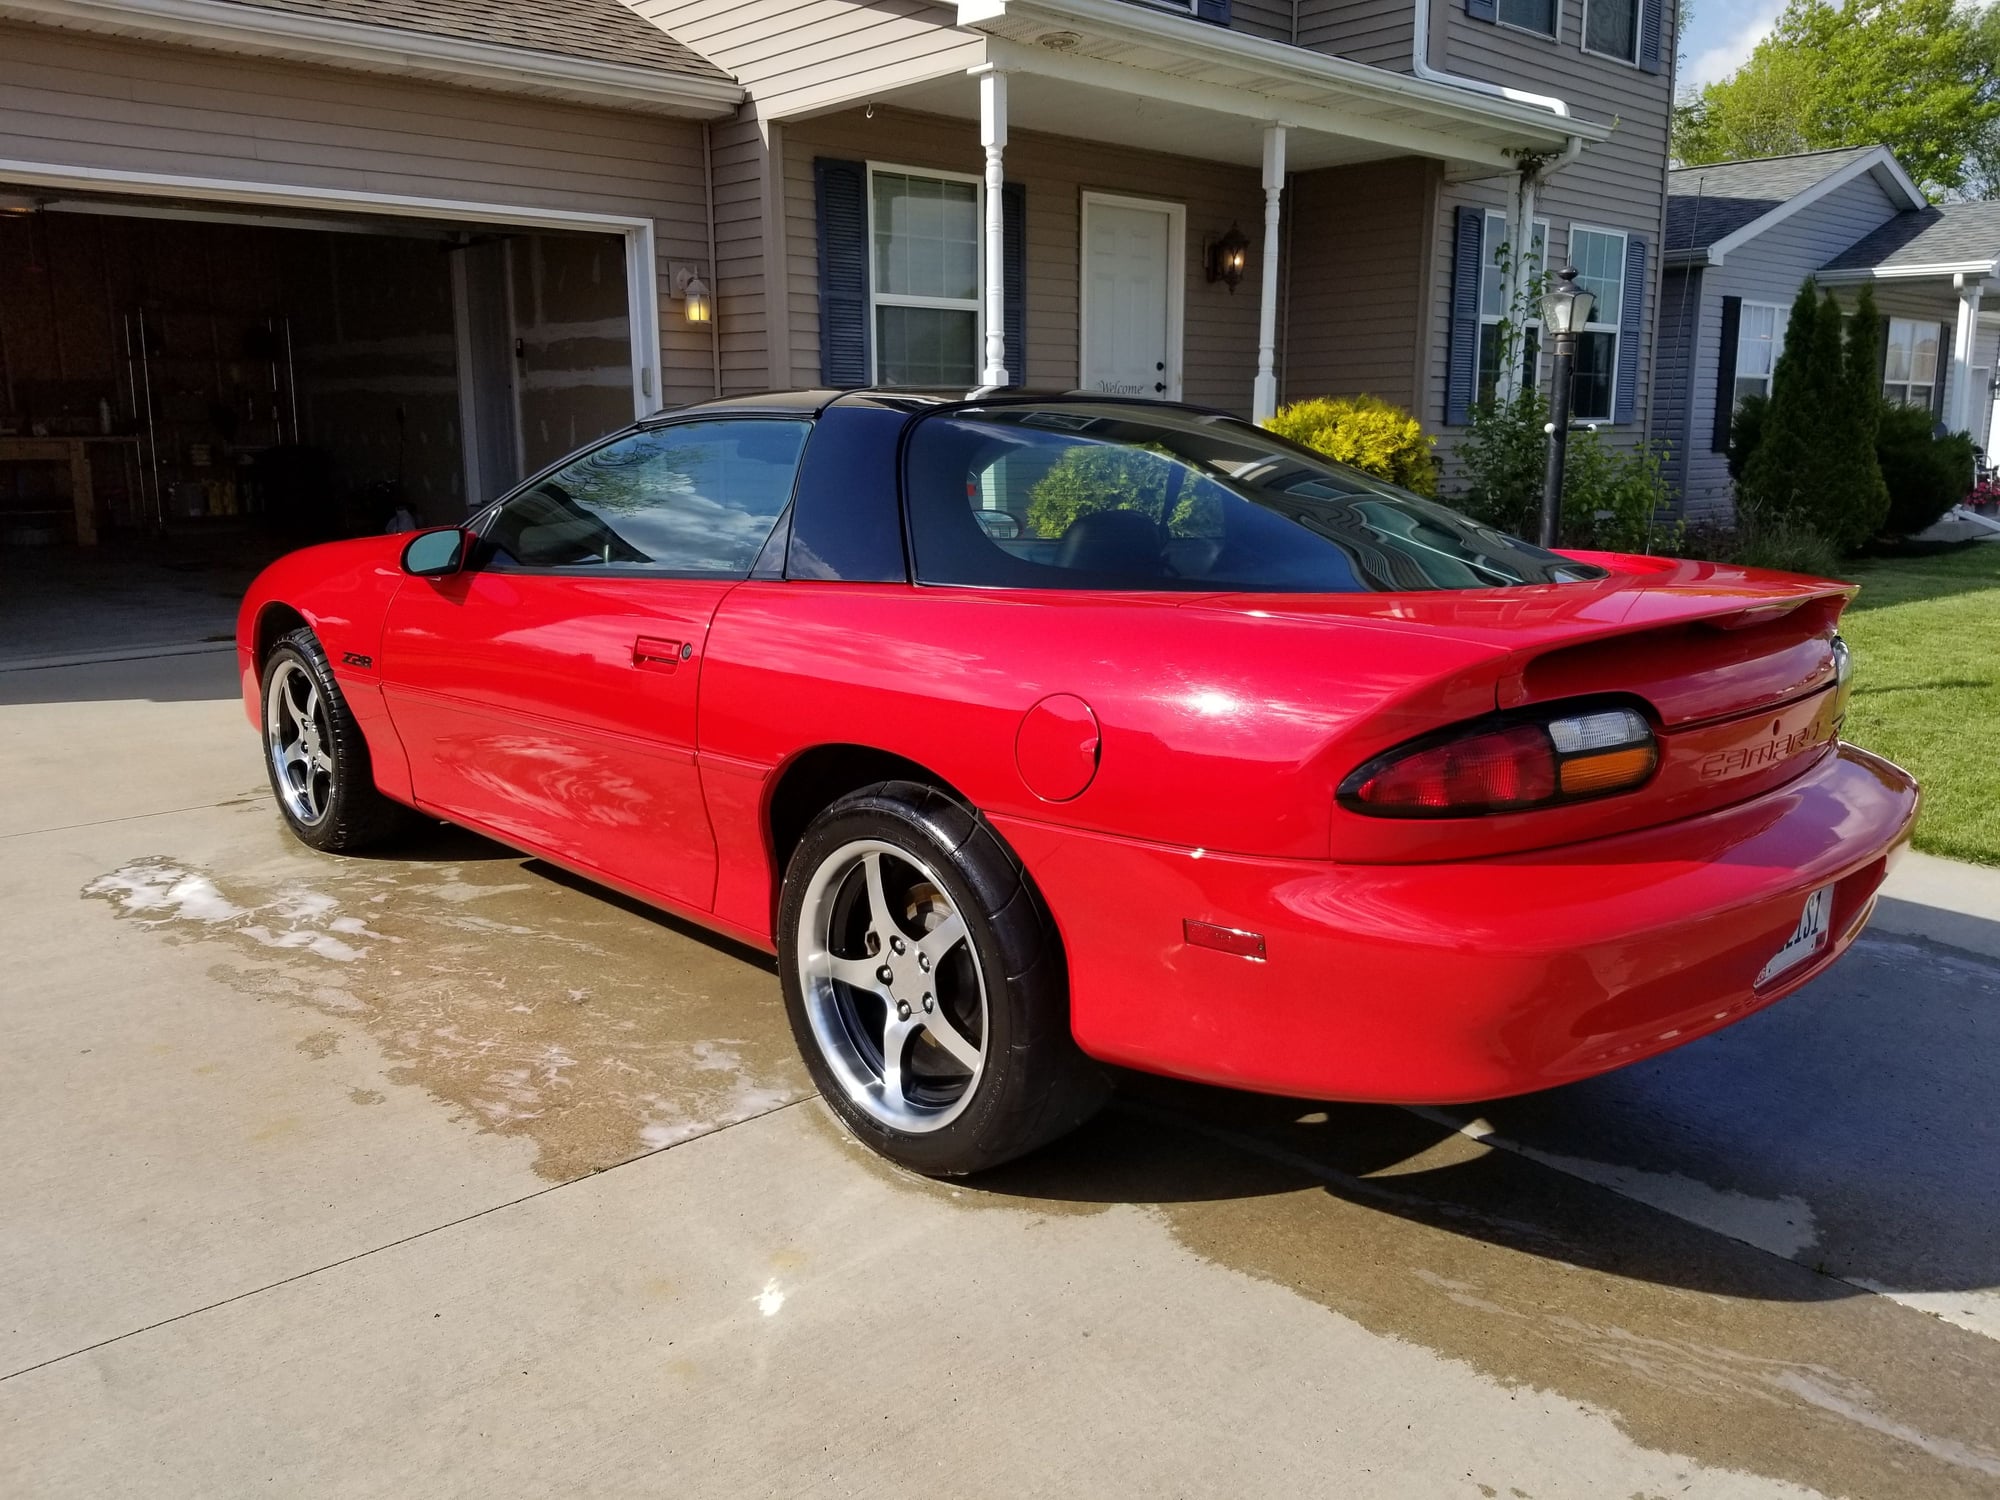 2000 Chevrolet Camaro - 2000 Chevrolet Camaro Z28 H/C/I - Used - VIN 2G1FP22G2Y2175137 - 100,000 Miles - 8 cyl - 2WD - Manual - Coupe - Red - Delta, OH 43515, United States